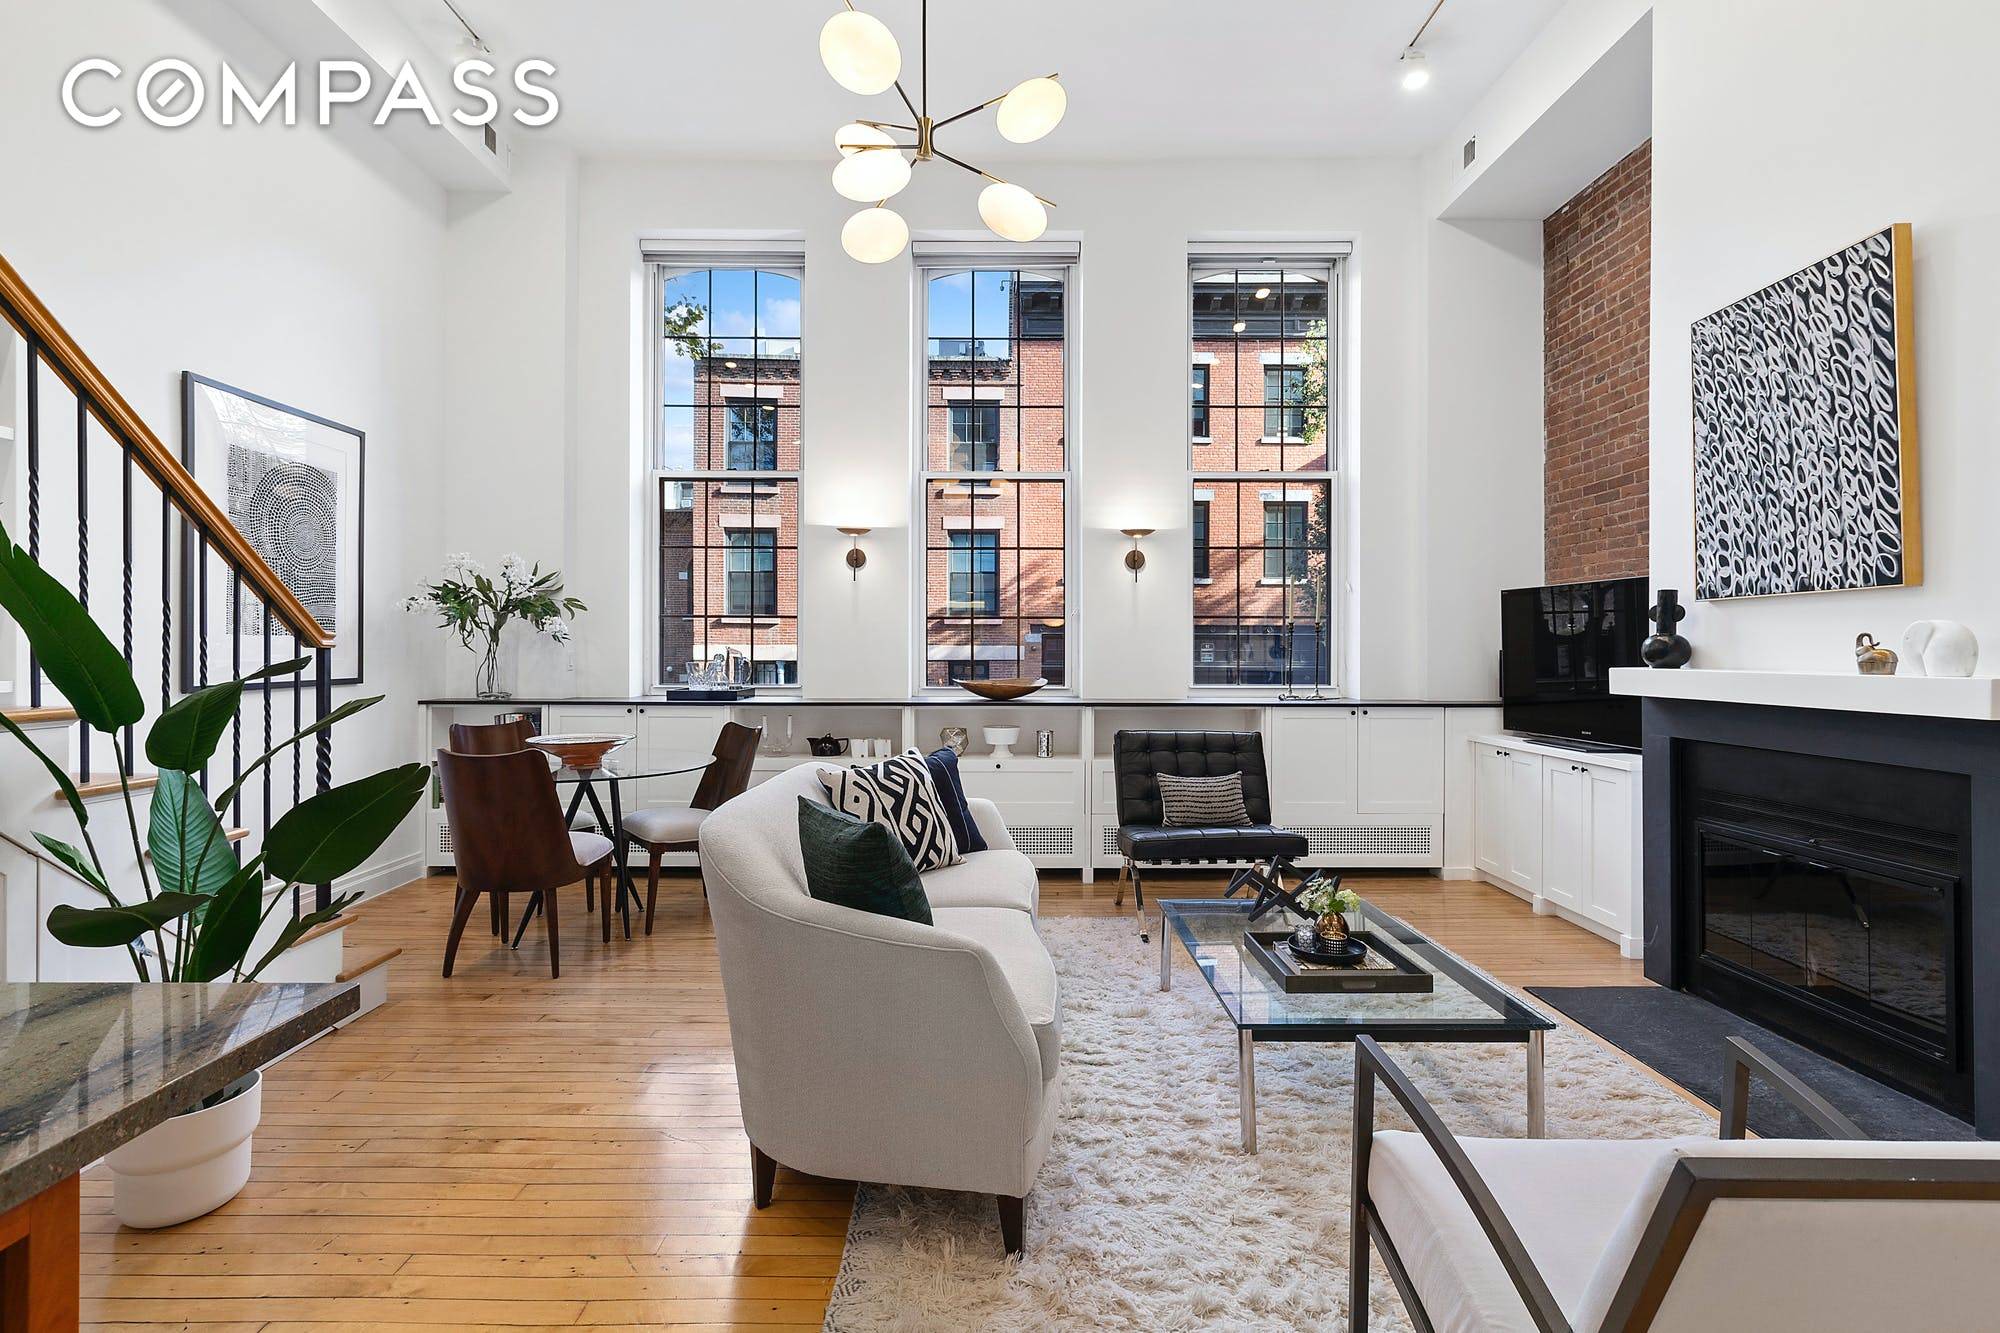 A renovated three bedroom triplex designed by renowned architects Baxt Ingui with private parking in a landmarked, turn of the century former schoolhouse in prime Cobble Hill.